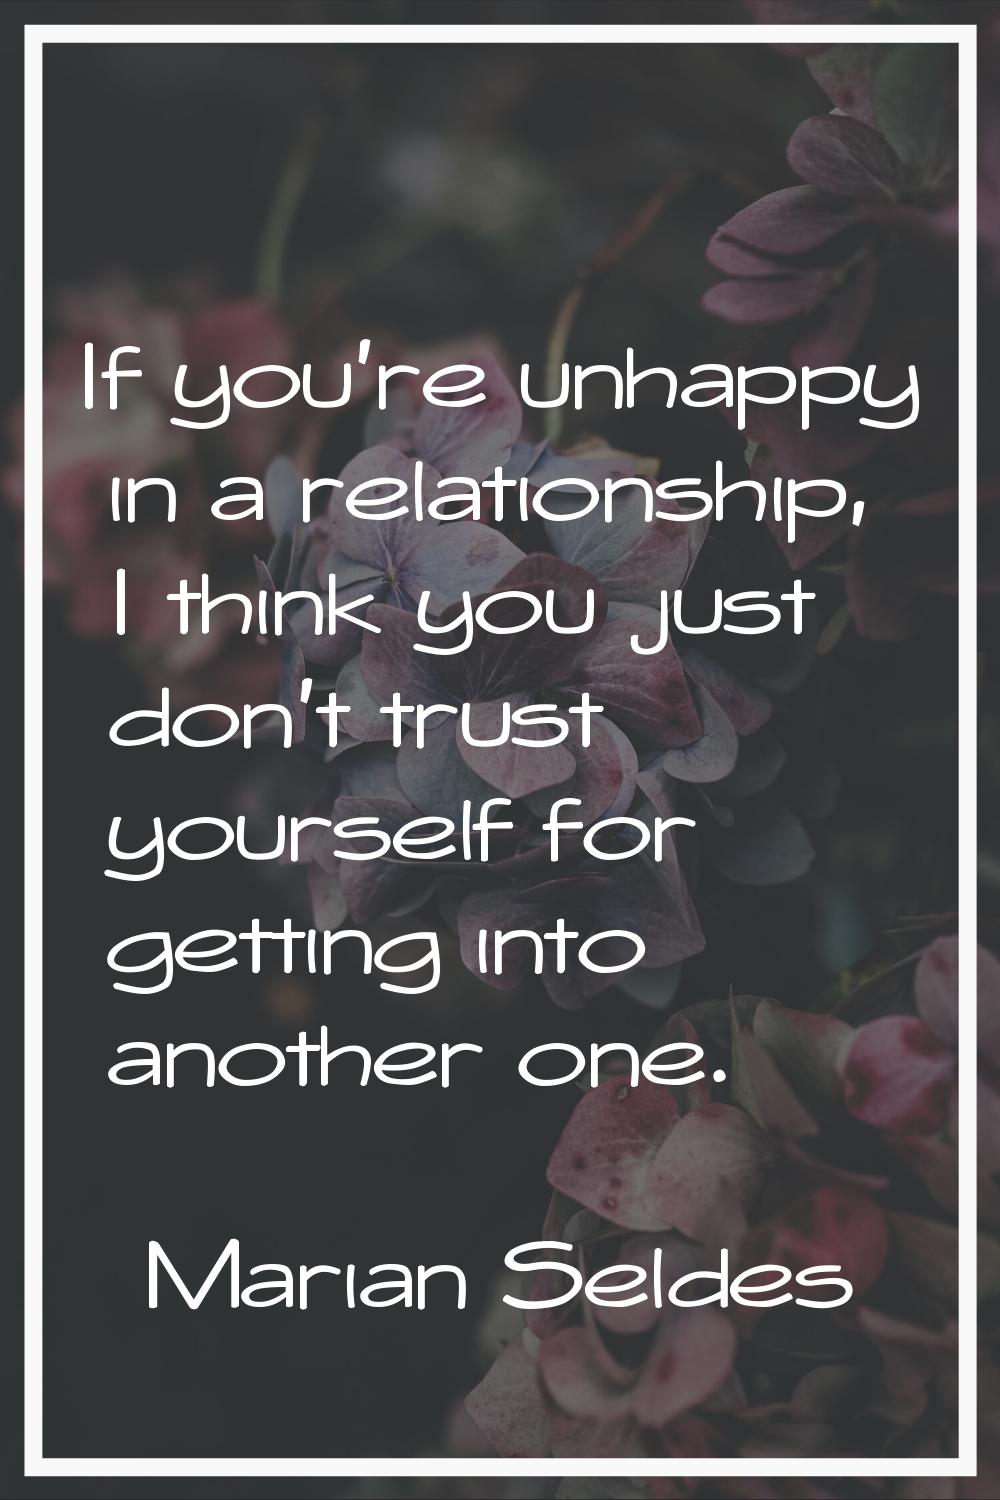 If you're unhappy in a relationship, I think you just don't trust yourself for getting into another